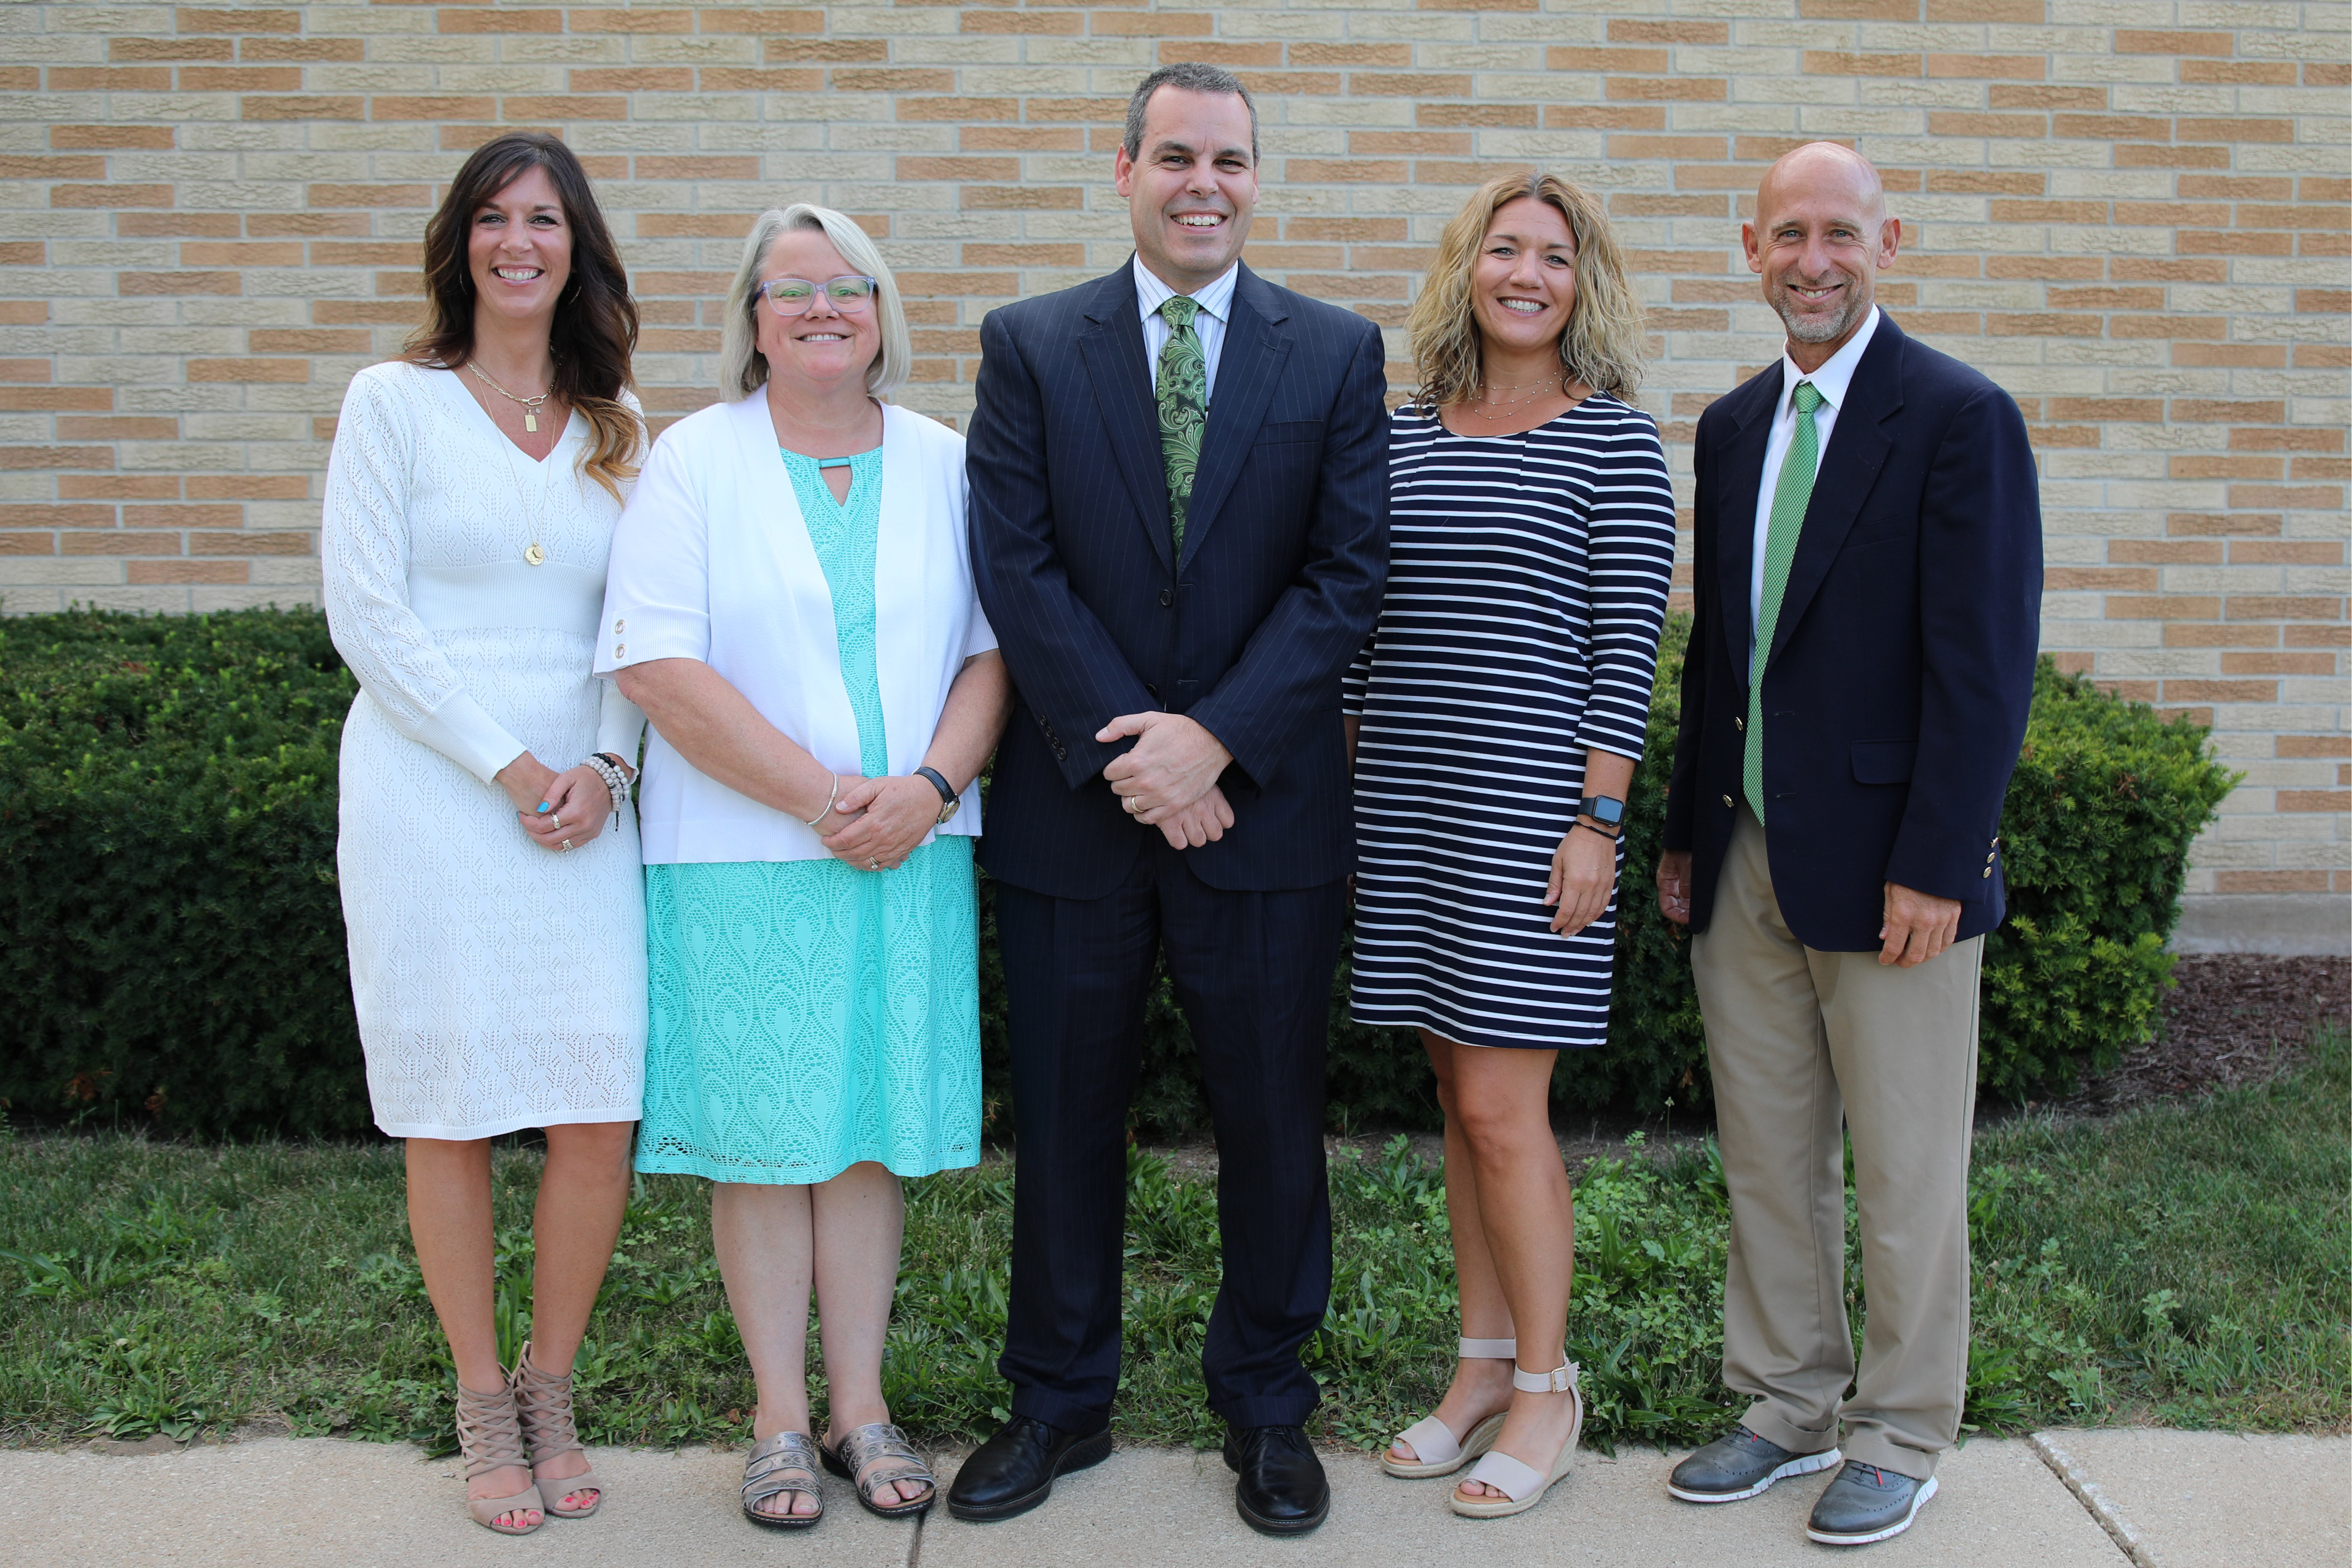 Five school board members pose for a picture